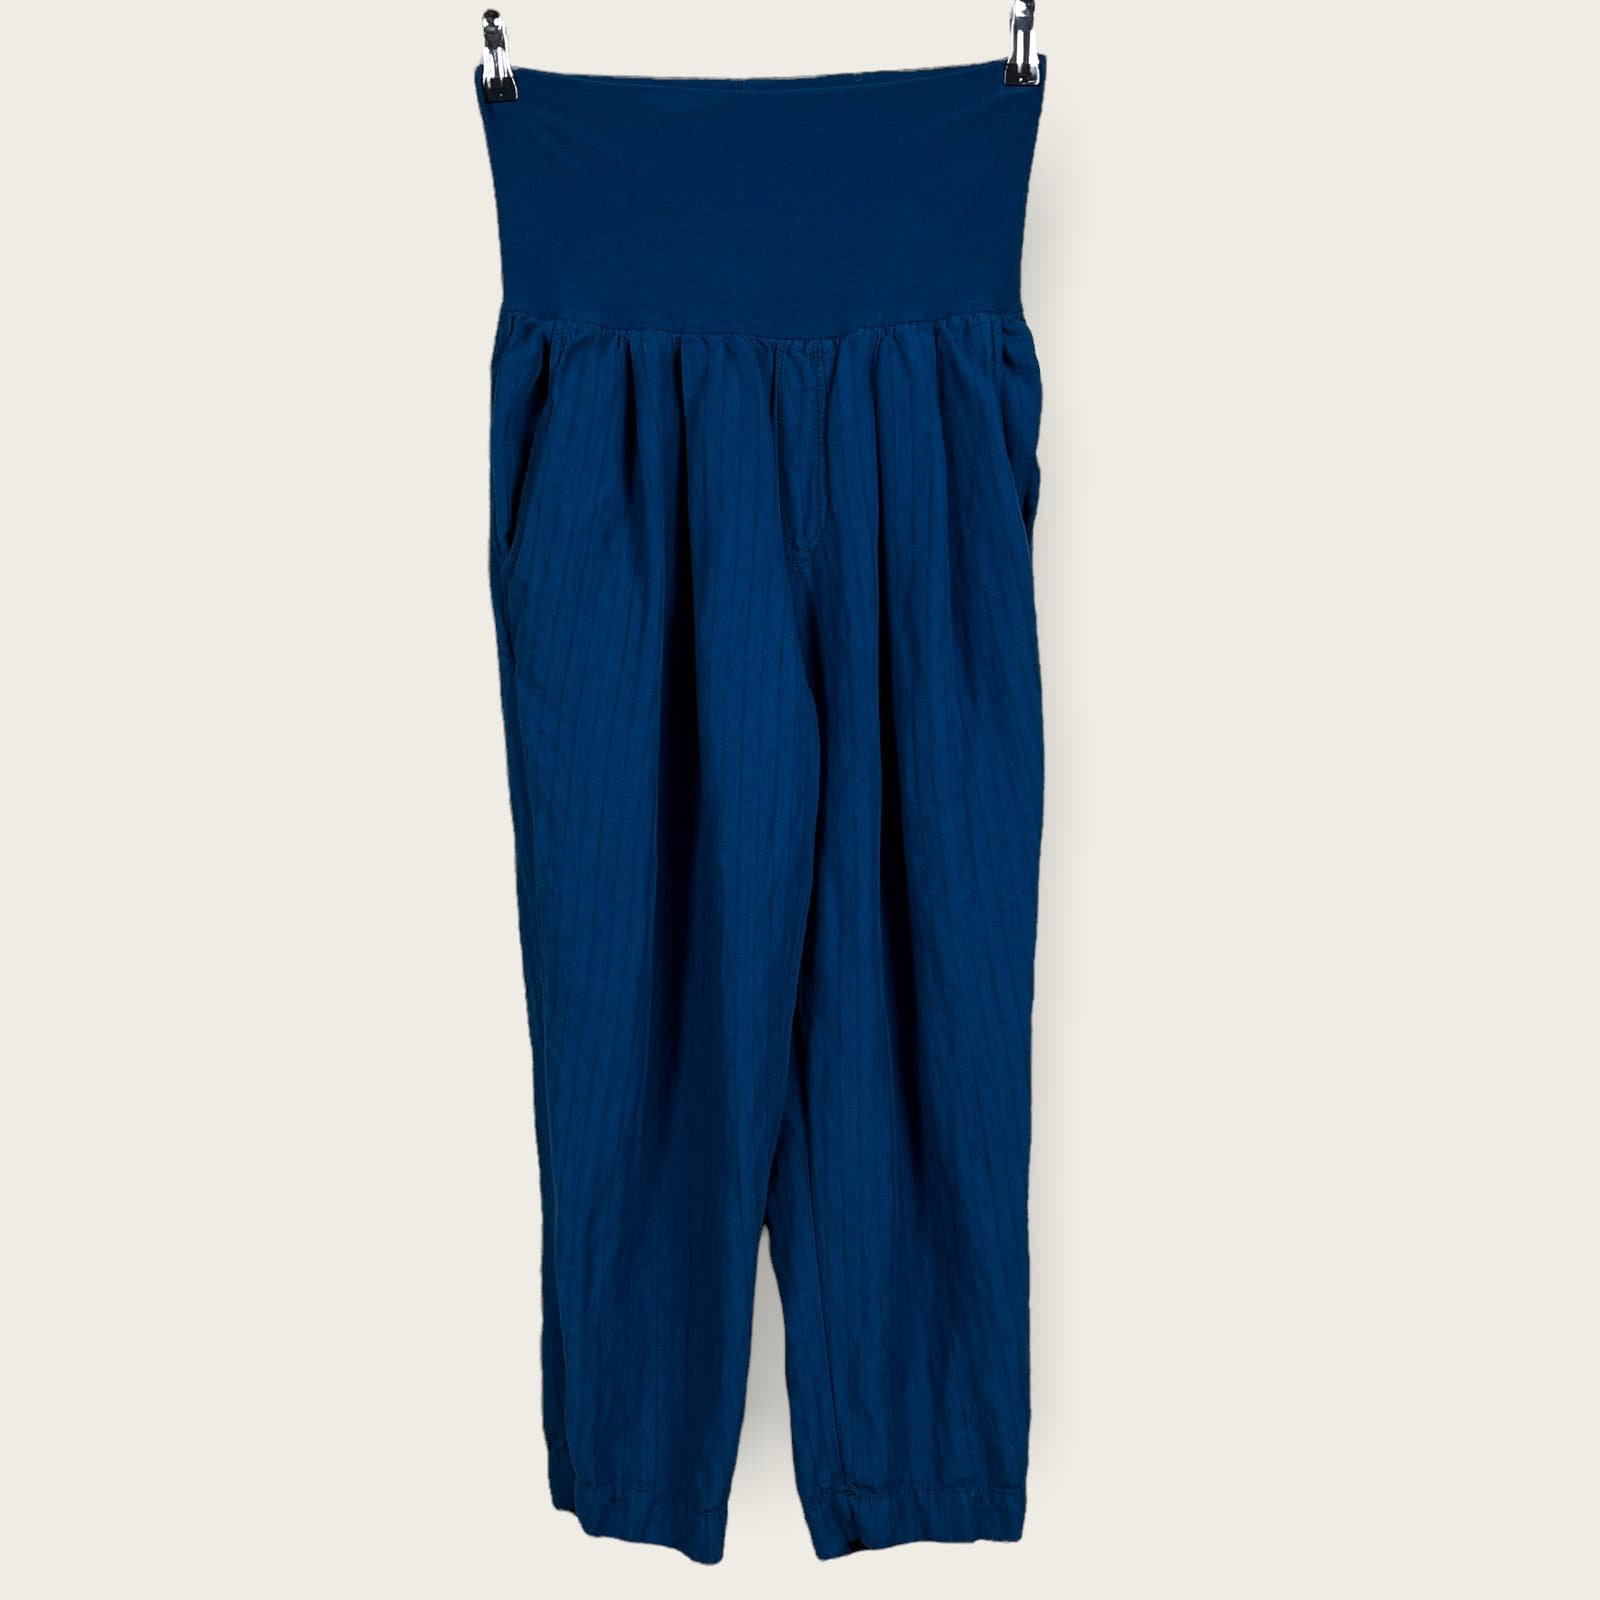 Fashion Anthropologie Hei Hei Size XS Eventide Blue Stripe Crop Fold Over Lounge Pants O3rMh6yQx Low Price